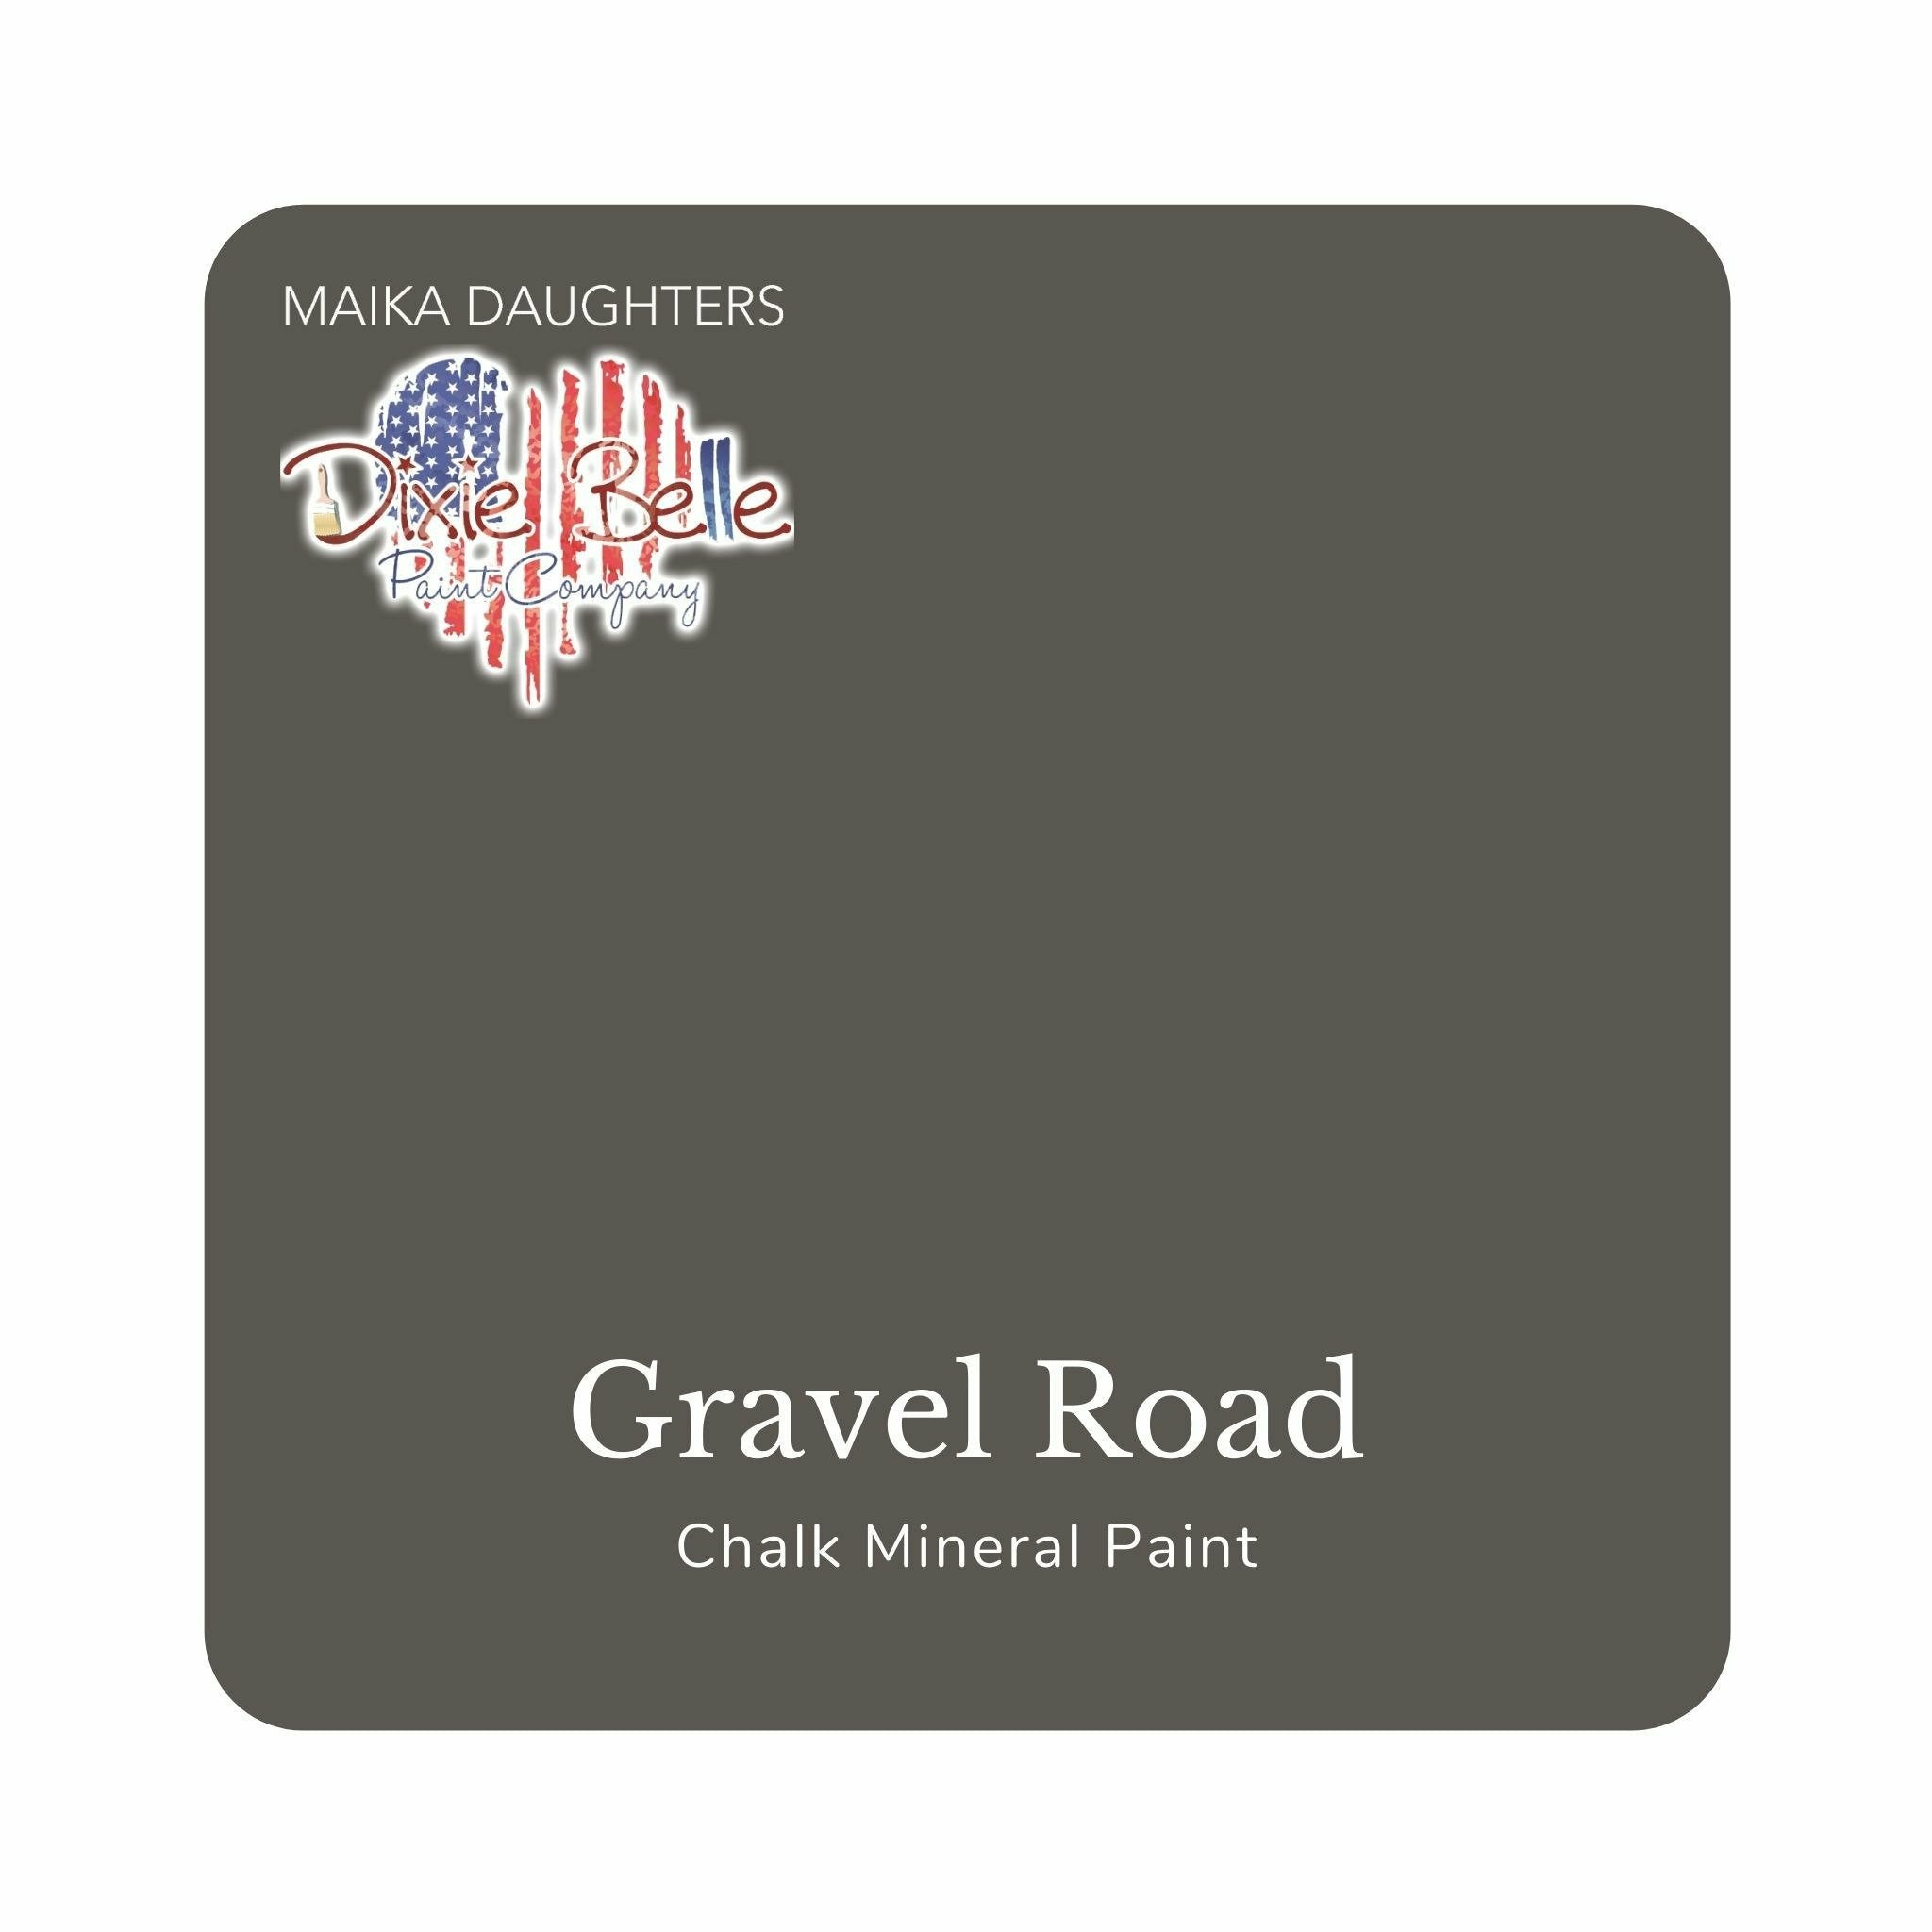 A square swatch card of Dixie Belle Paint Company’s Gravel Road Chalk Mineral Paint is against a white background. This color is a rich gray.